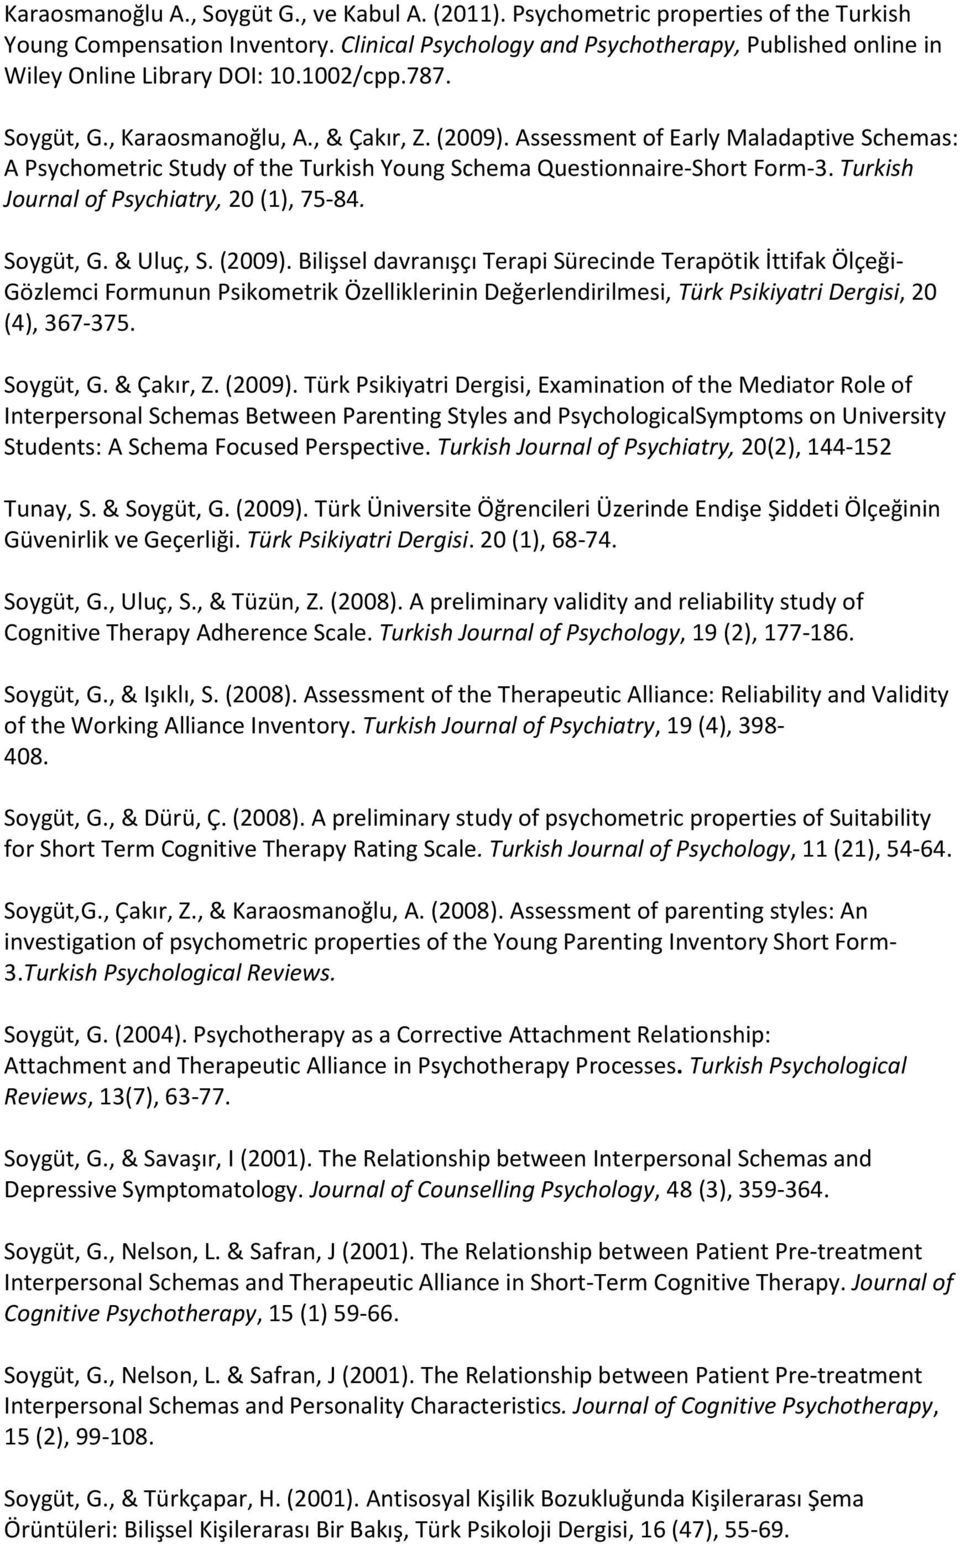 Assessment of Early Maladaptive Schemas: A Psychometric Study of the Turkish Young Schema Questionnaire-Short Form-3. Turkish Journal of Psychiatry, 20 (1), 75-84. Soygüt, G. & Uluç, S. (2009).